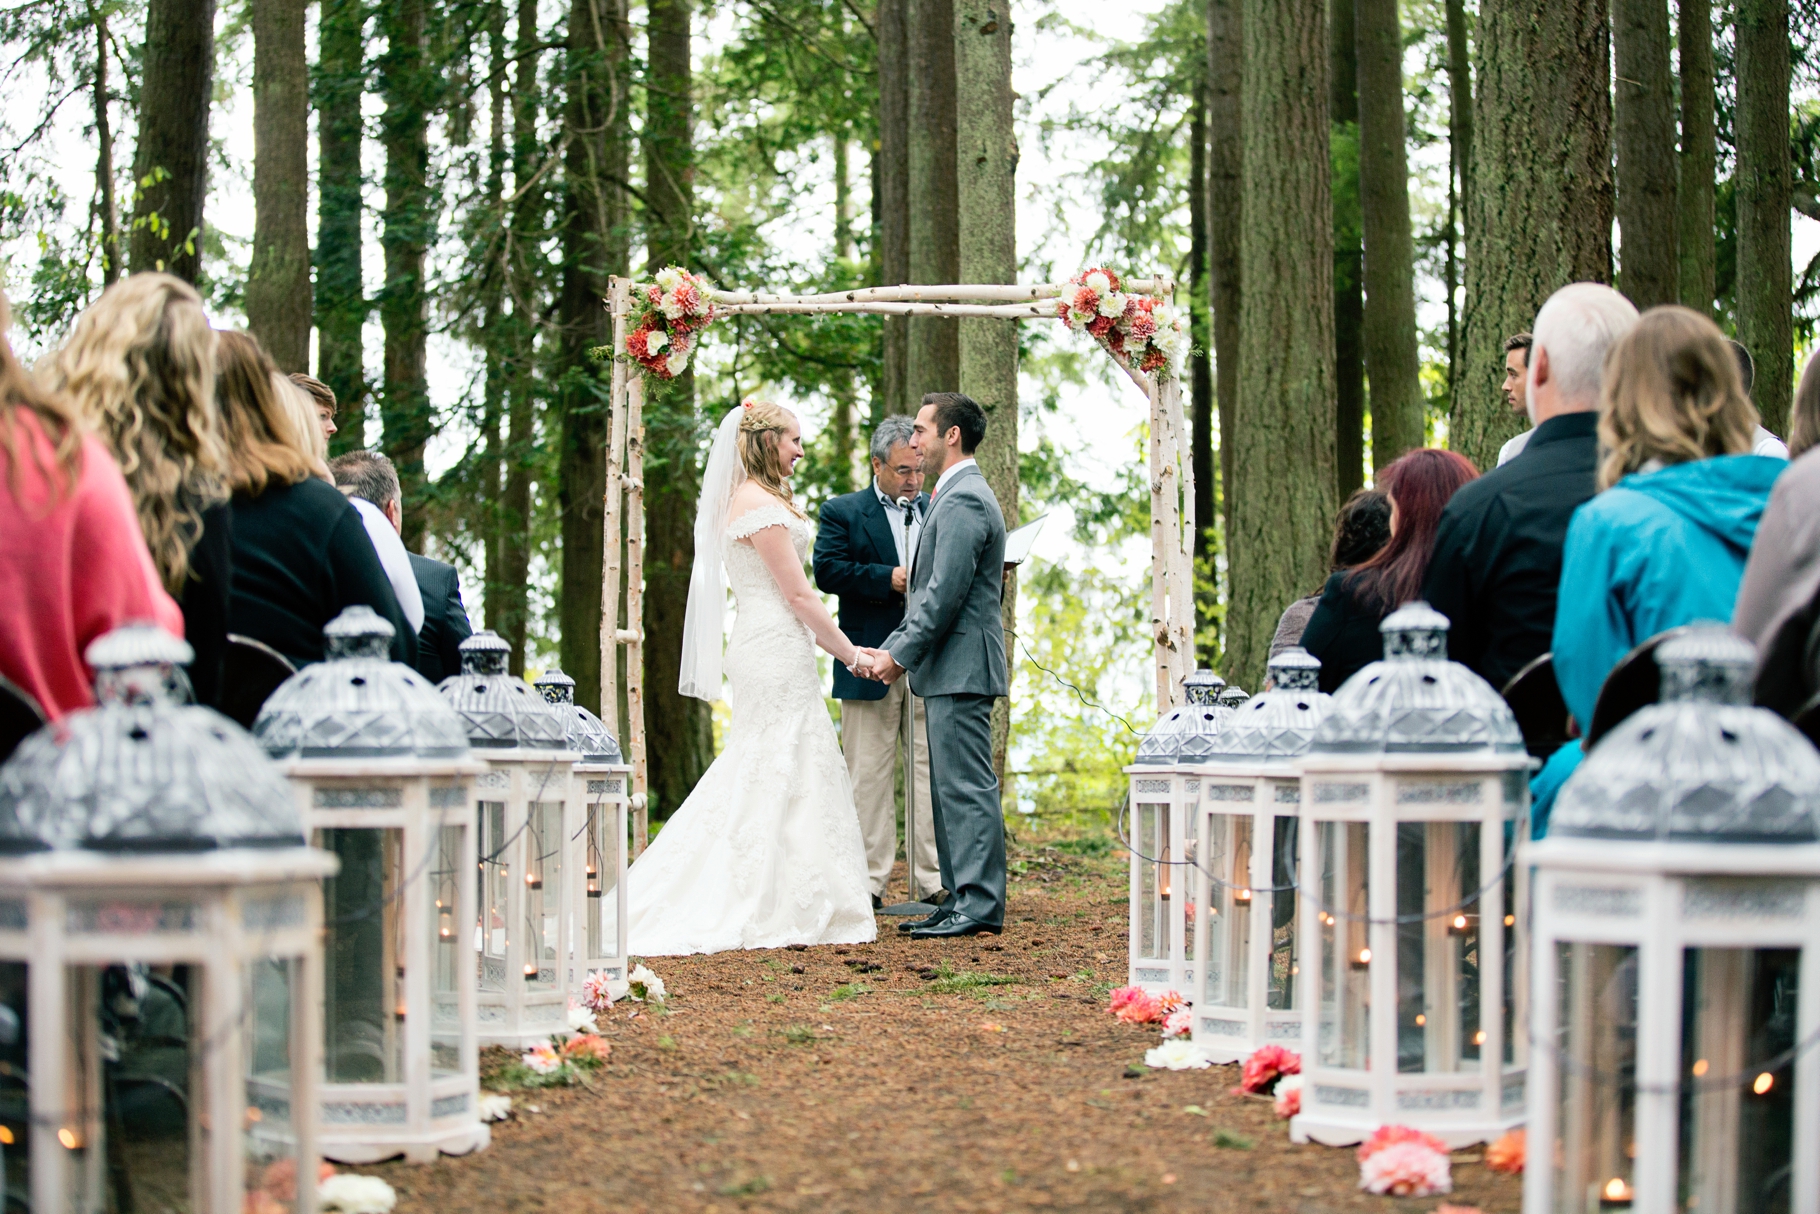 34-Ceremony-Bride-Groom-Vows-wooded-bluff-olympic-mountains-Kitsap-Memorial-State-Park-Forest-Northwest-Photographer-Seattle-Wedding-Photography-by-Betty-Elaine